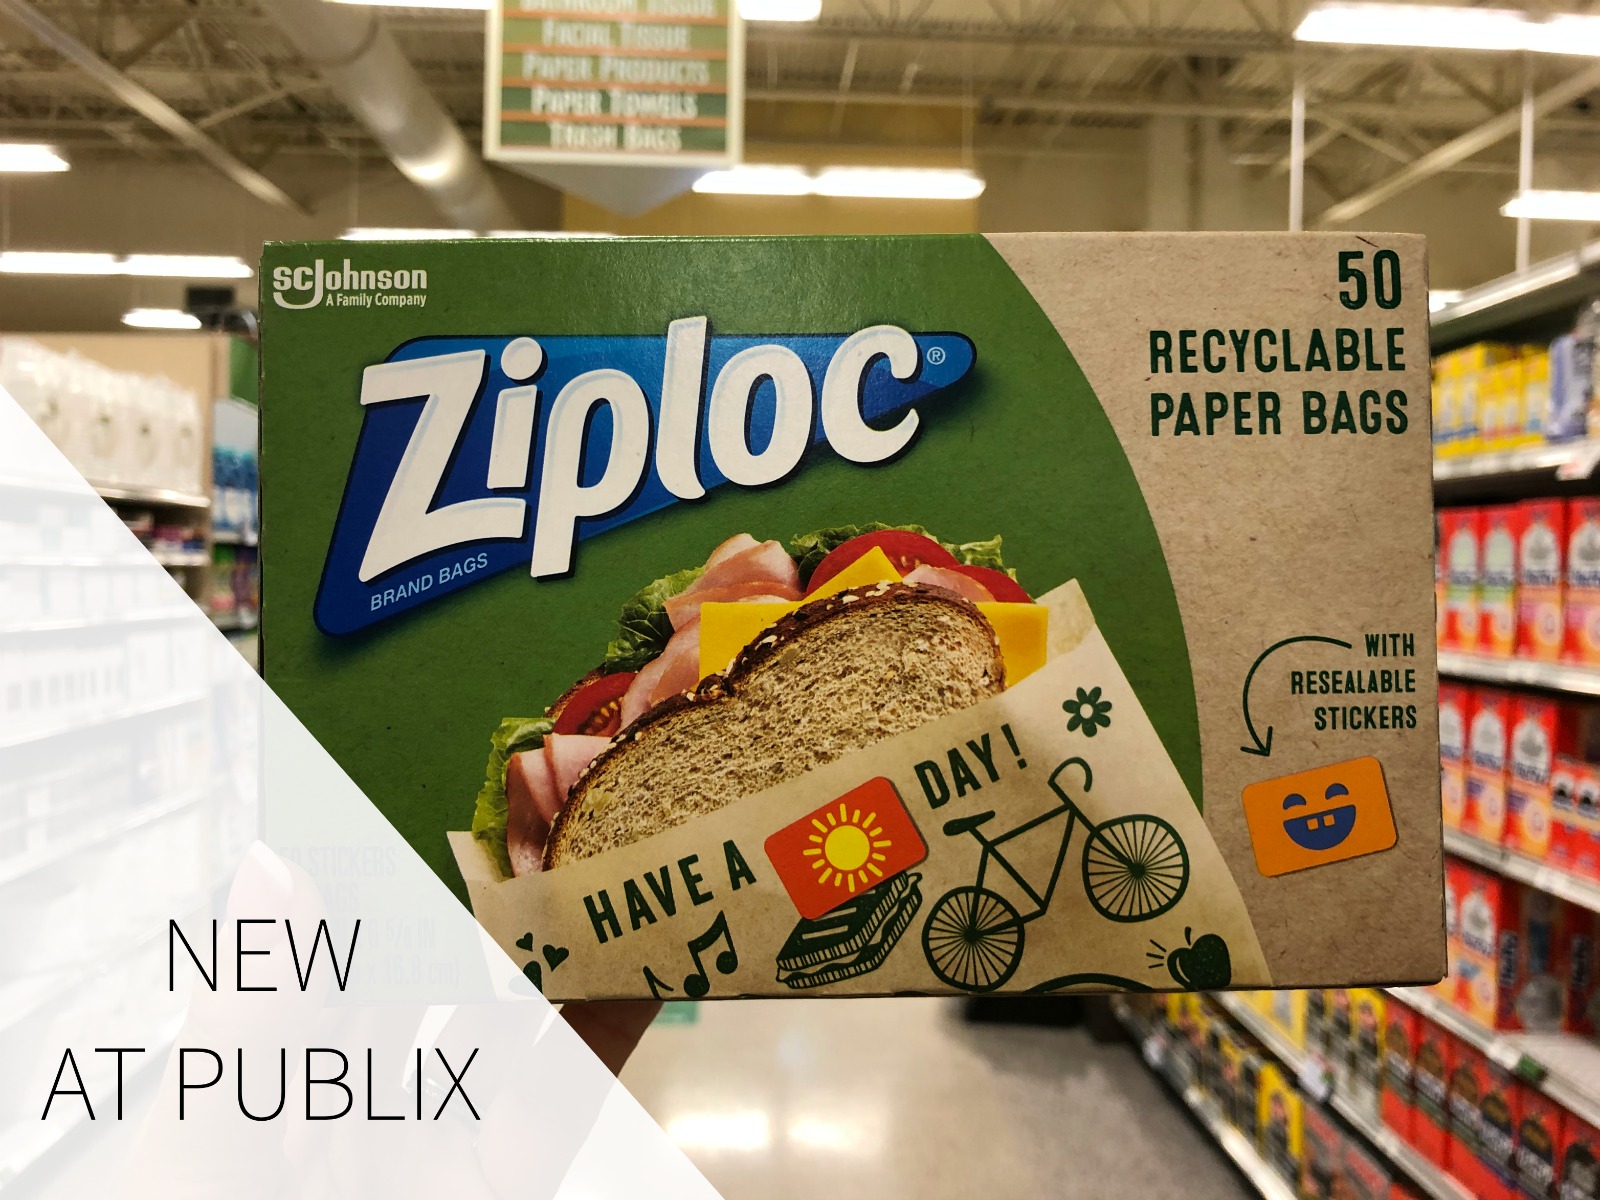 Look For New Ziploc® Paper Bags At Publix - Recyclable, Resealable & Reusable Bags With Fun Designs! on I Heart Publix 1